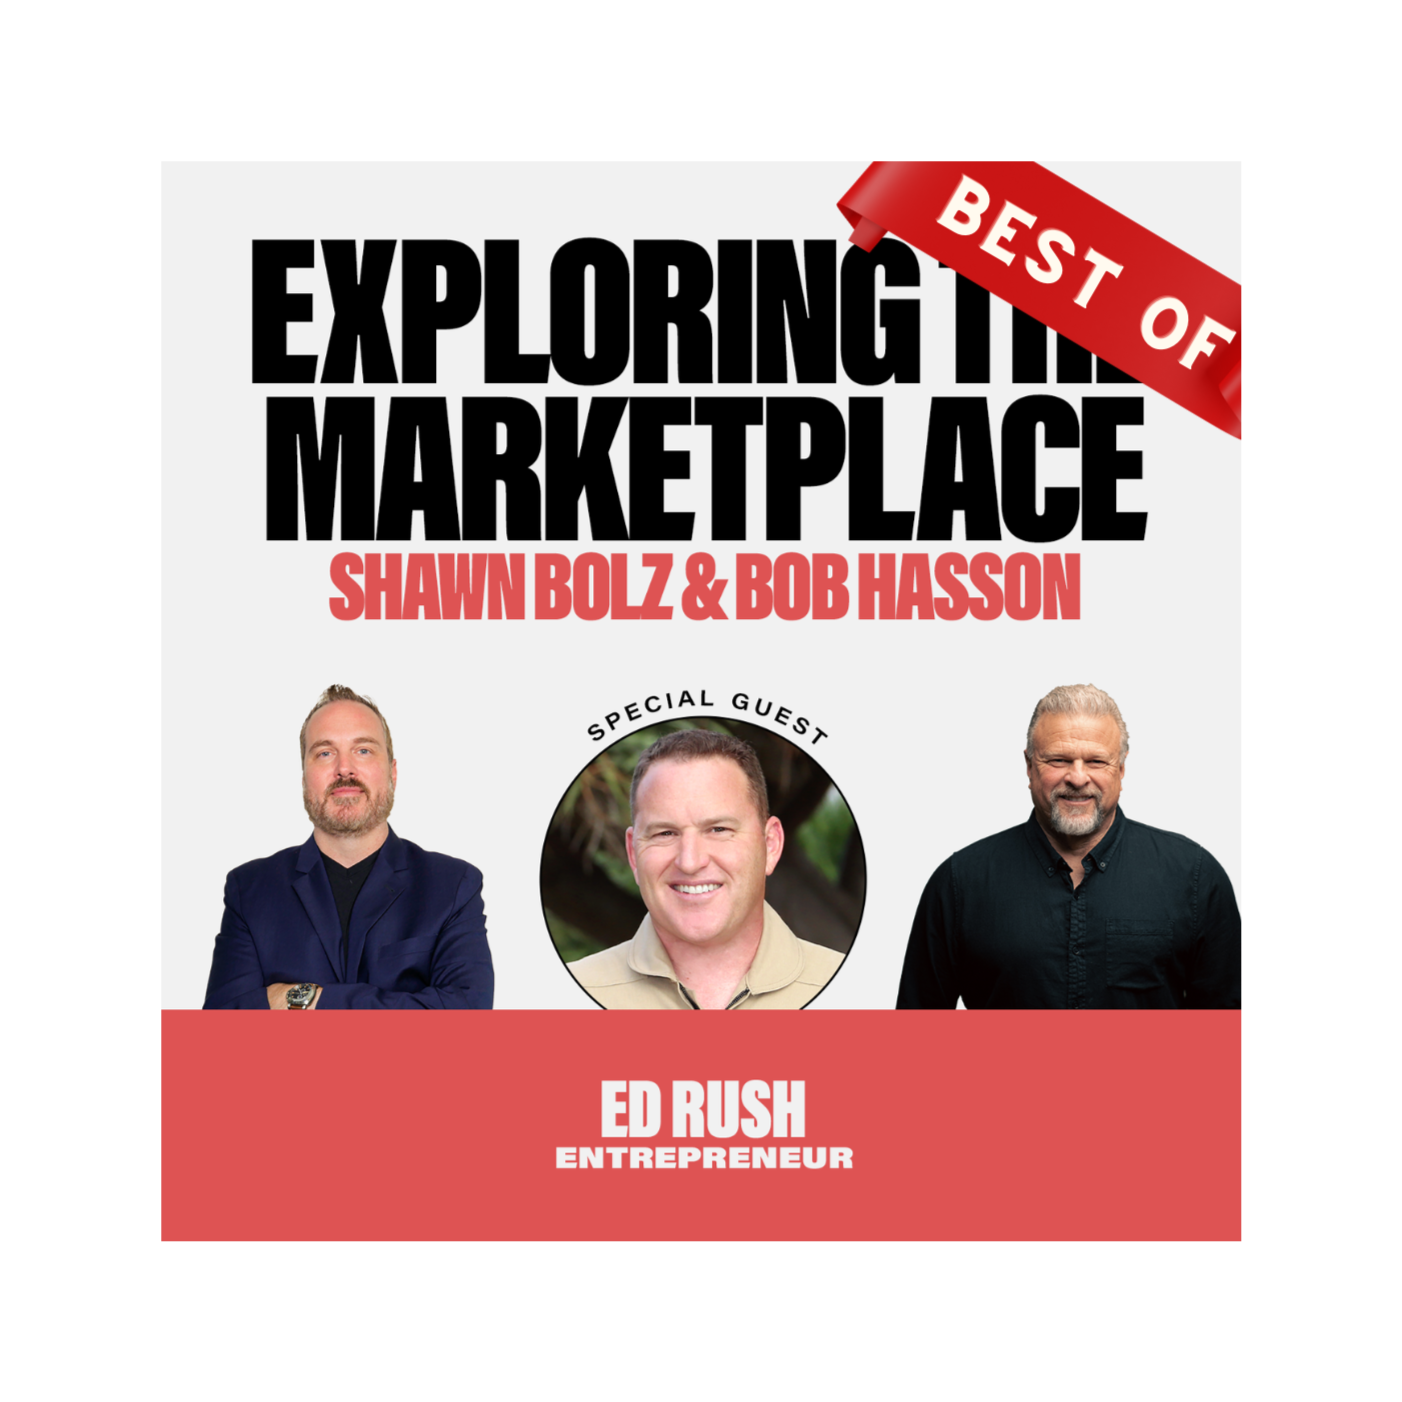 Real Life Top Gun Shares How to Hear From God About Your Business with Ed Rush (S:3 - Ep 74)